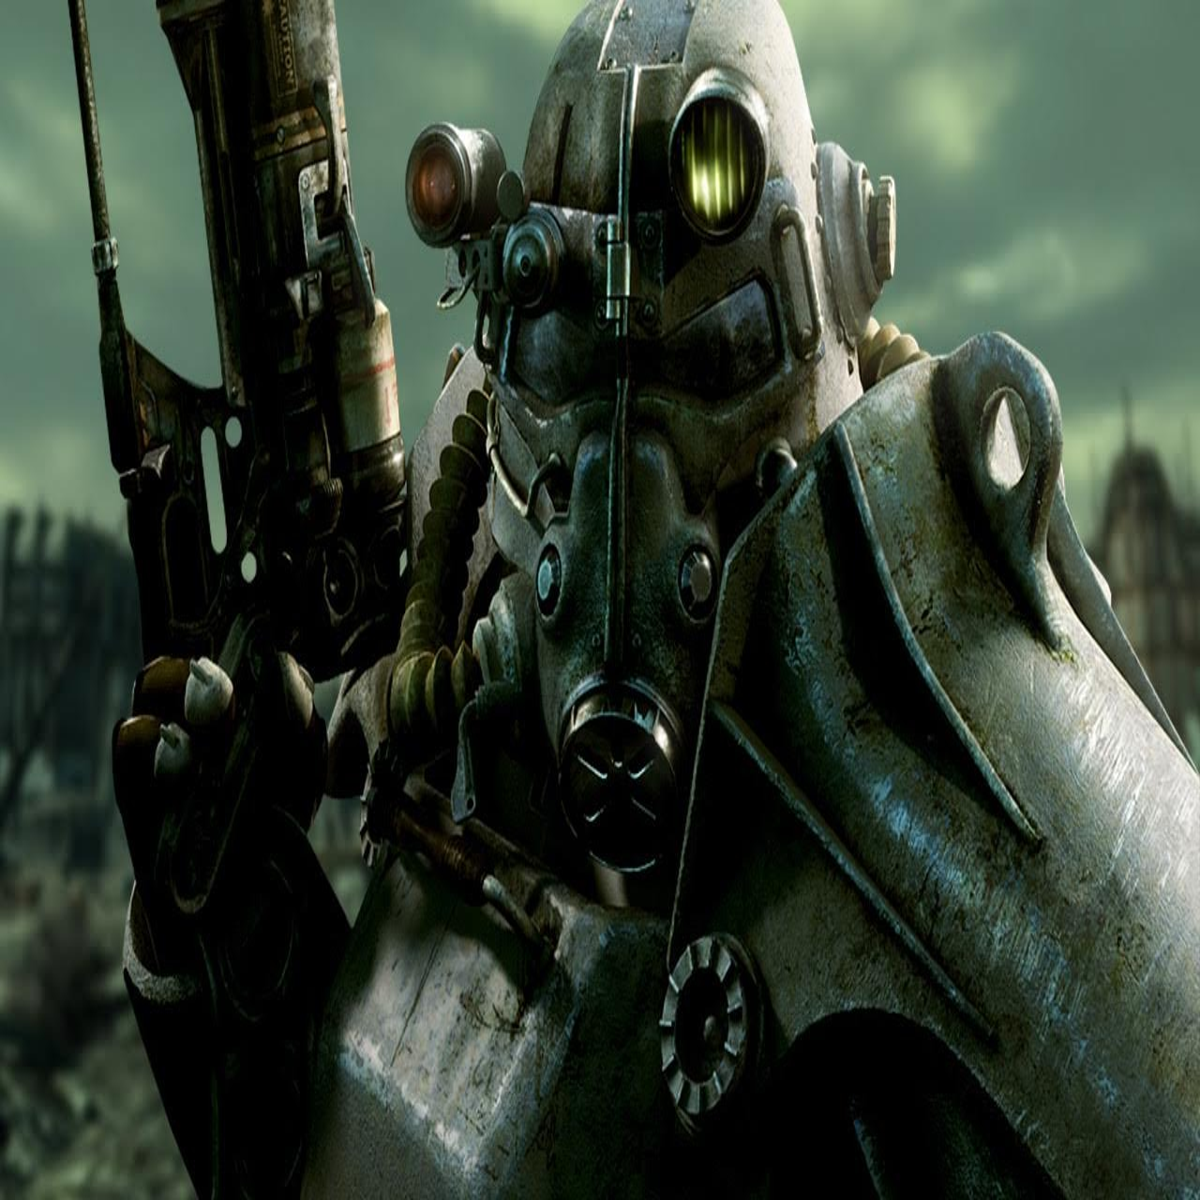 Fallout 3 Mod Remake Capital Wasteland Canceled Amid Fear of Legal Action -  Paste Magazine